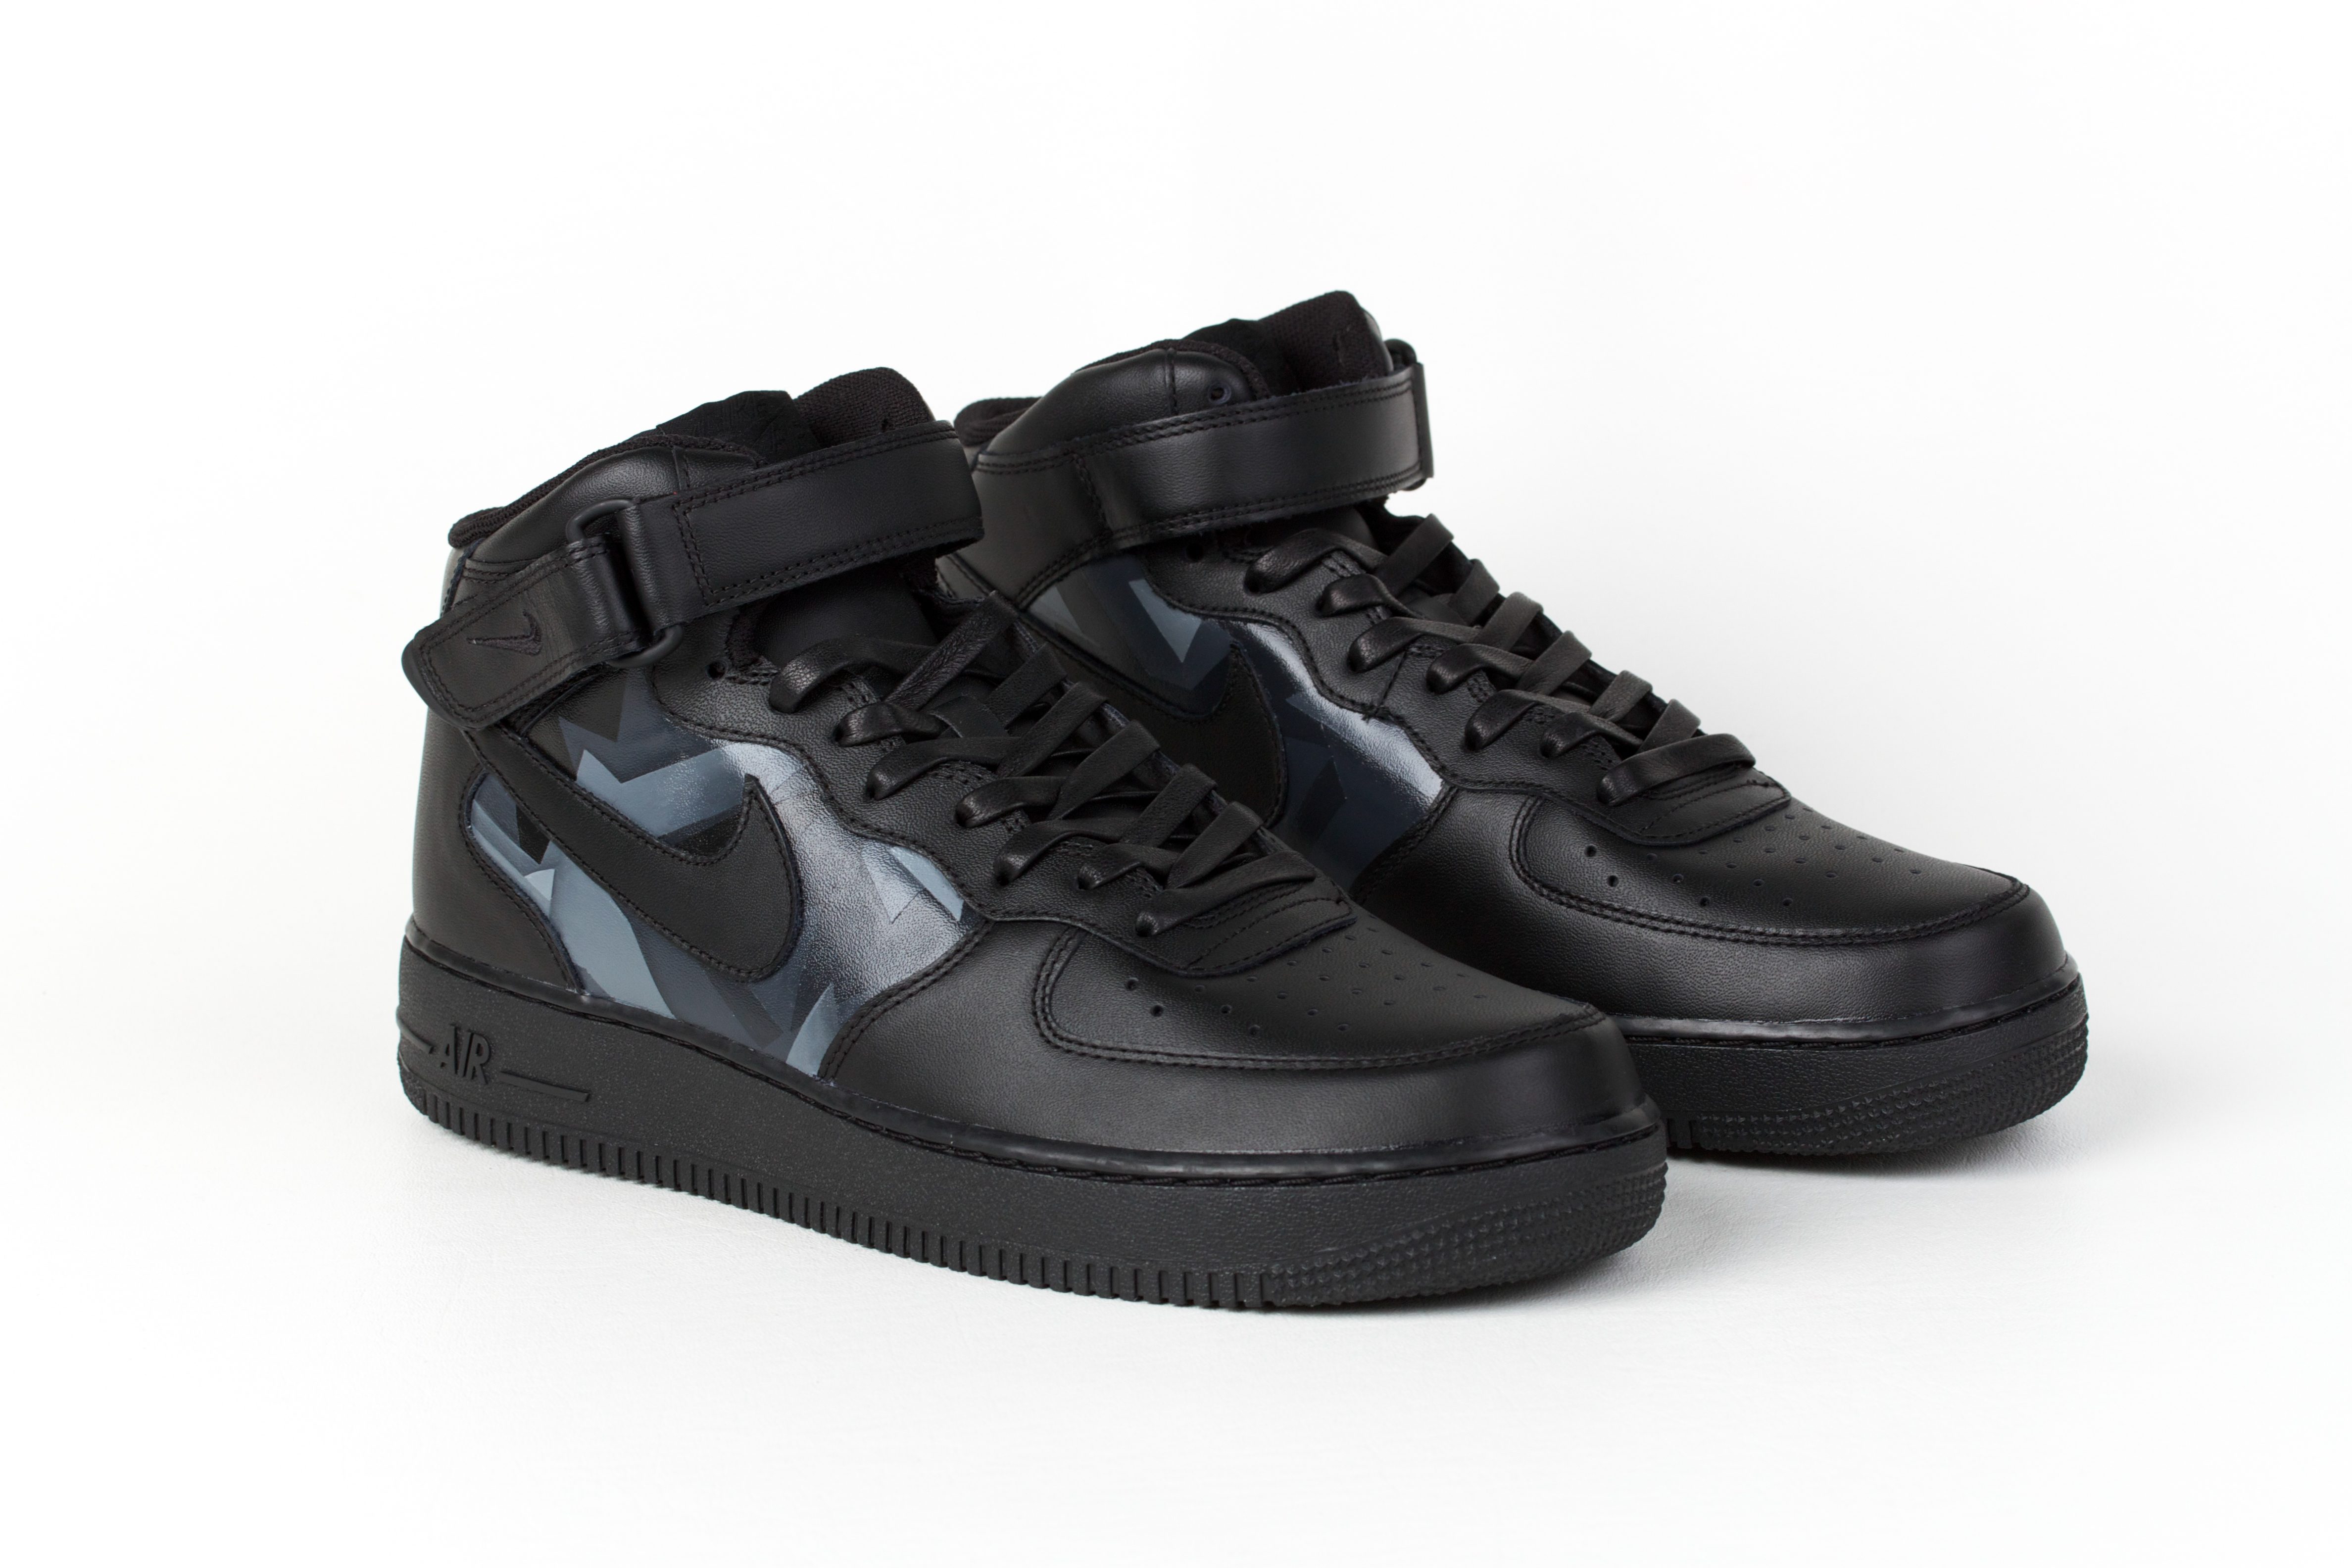 BMF Debut: Nike Air Force 1 x x 'G-Eazy' - Hardwood and Hollywood